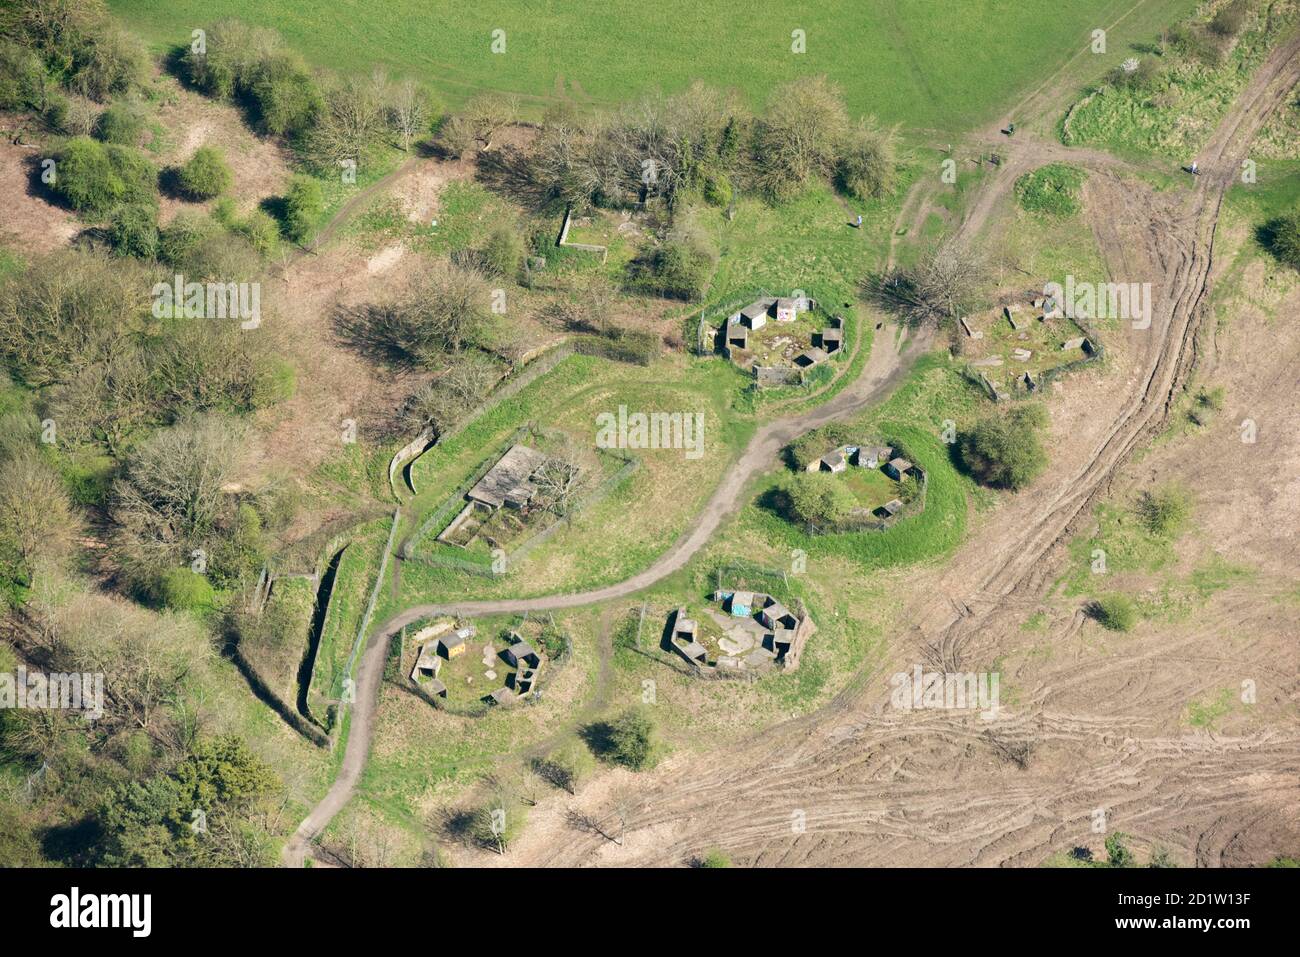 Remains of World War Two Heavy Anti Aircraft Battery Bristol B6, Pur Down, Stoke Park, Bristol, 2018, UK. Aerial view. Stock Photo